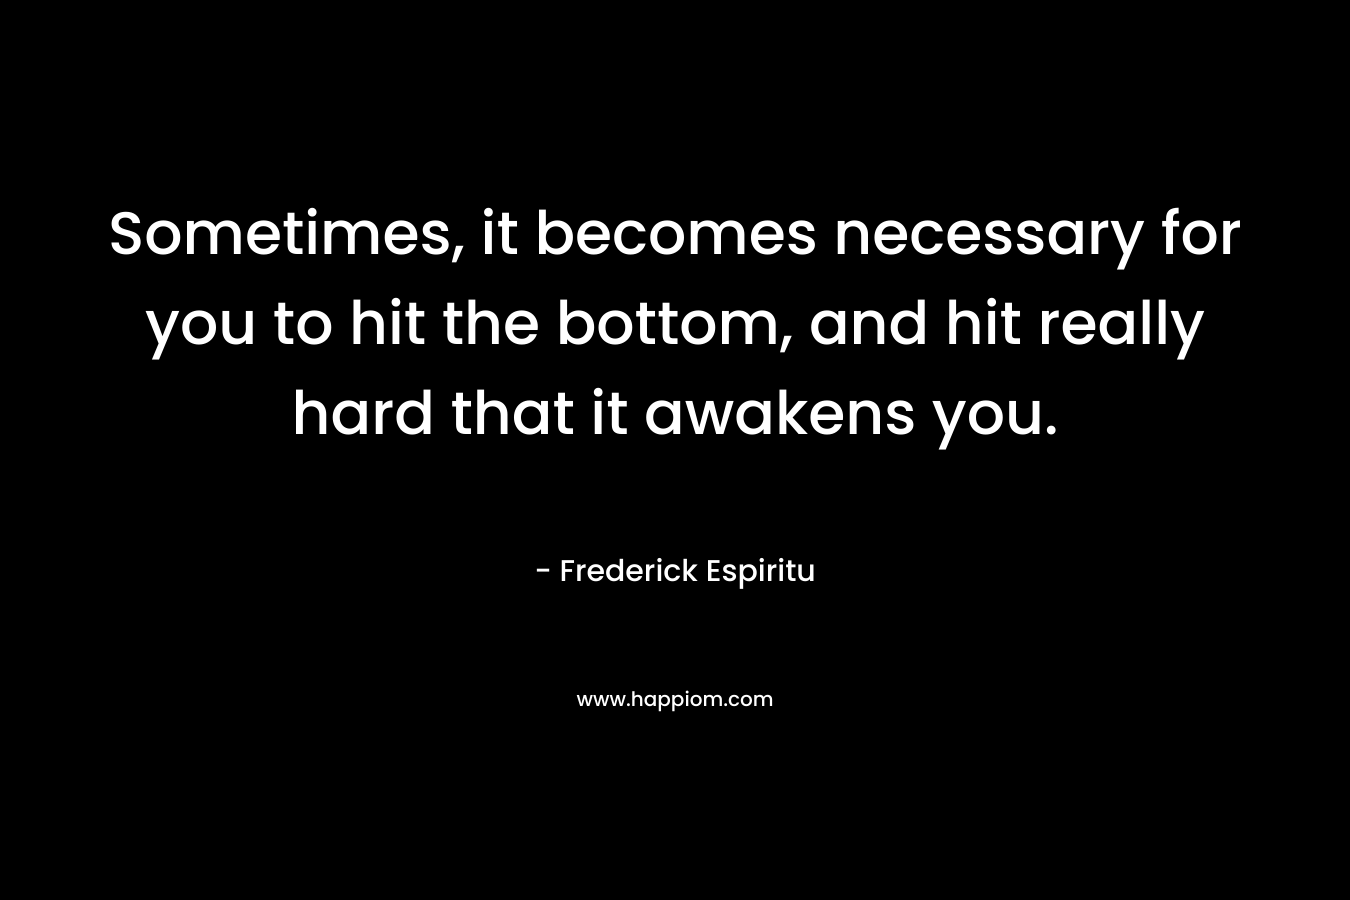 Sometimes, it becomes necessary for you to hit the bottom, and hit really hard that it awakens you. – Frederick Espiritu